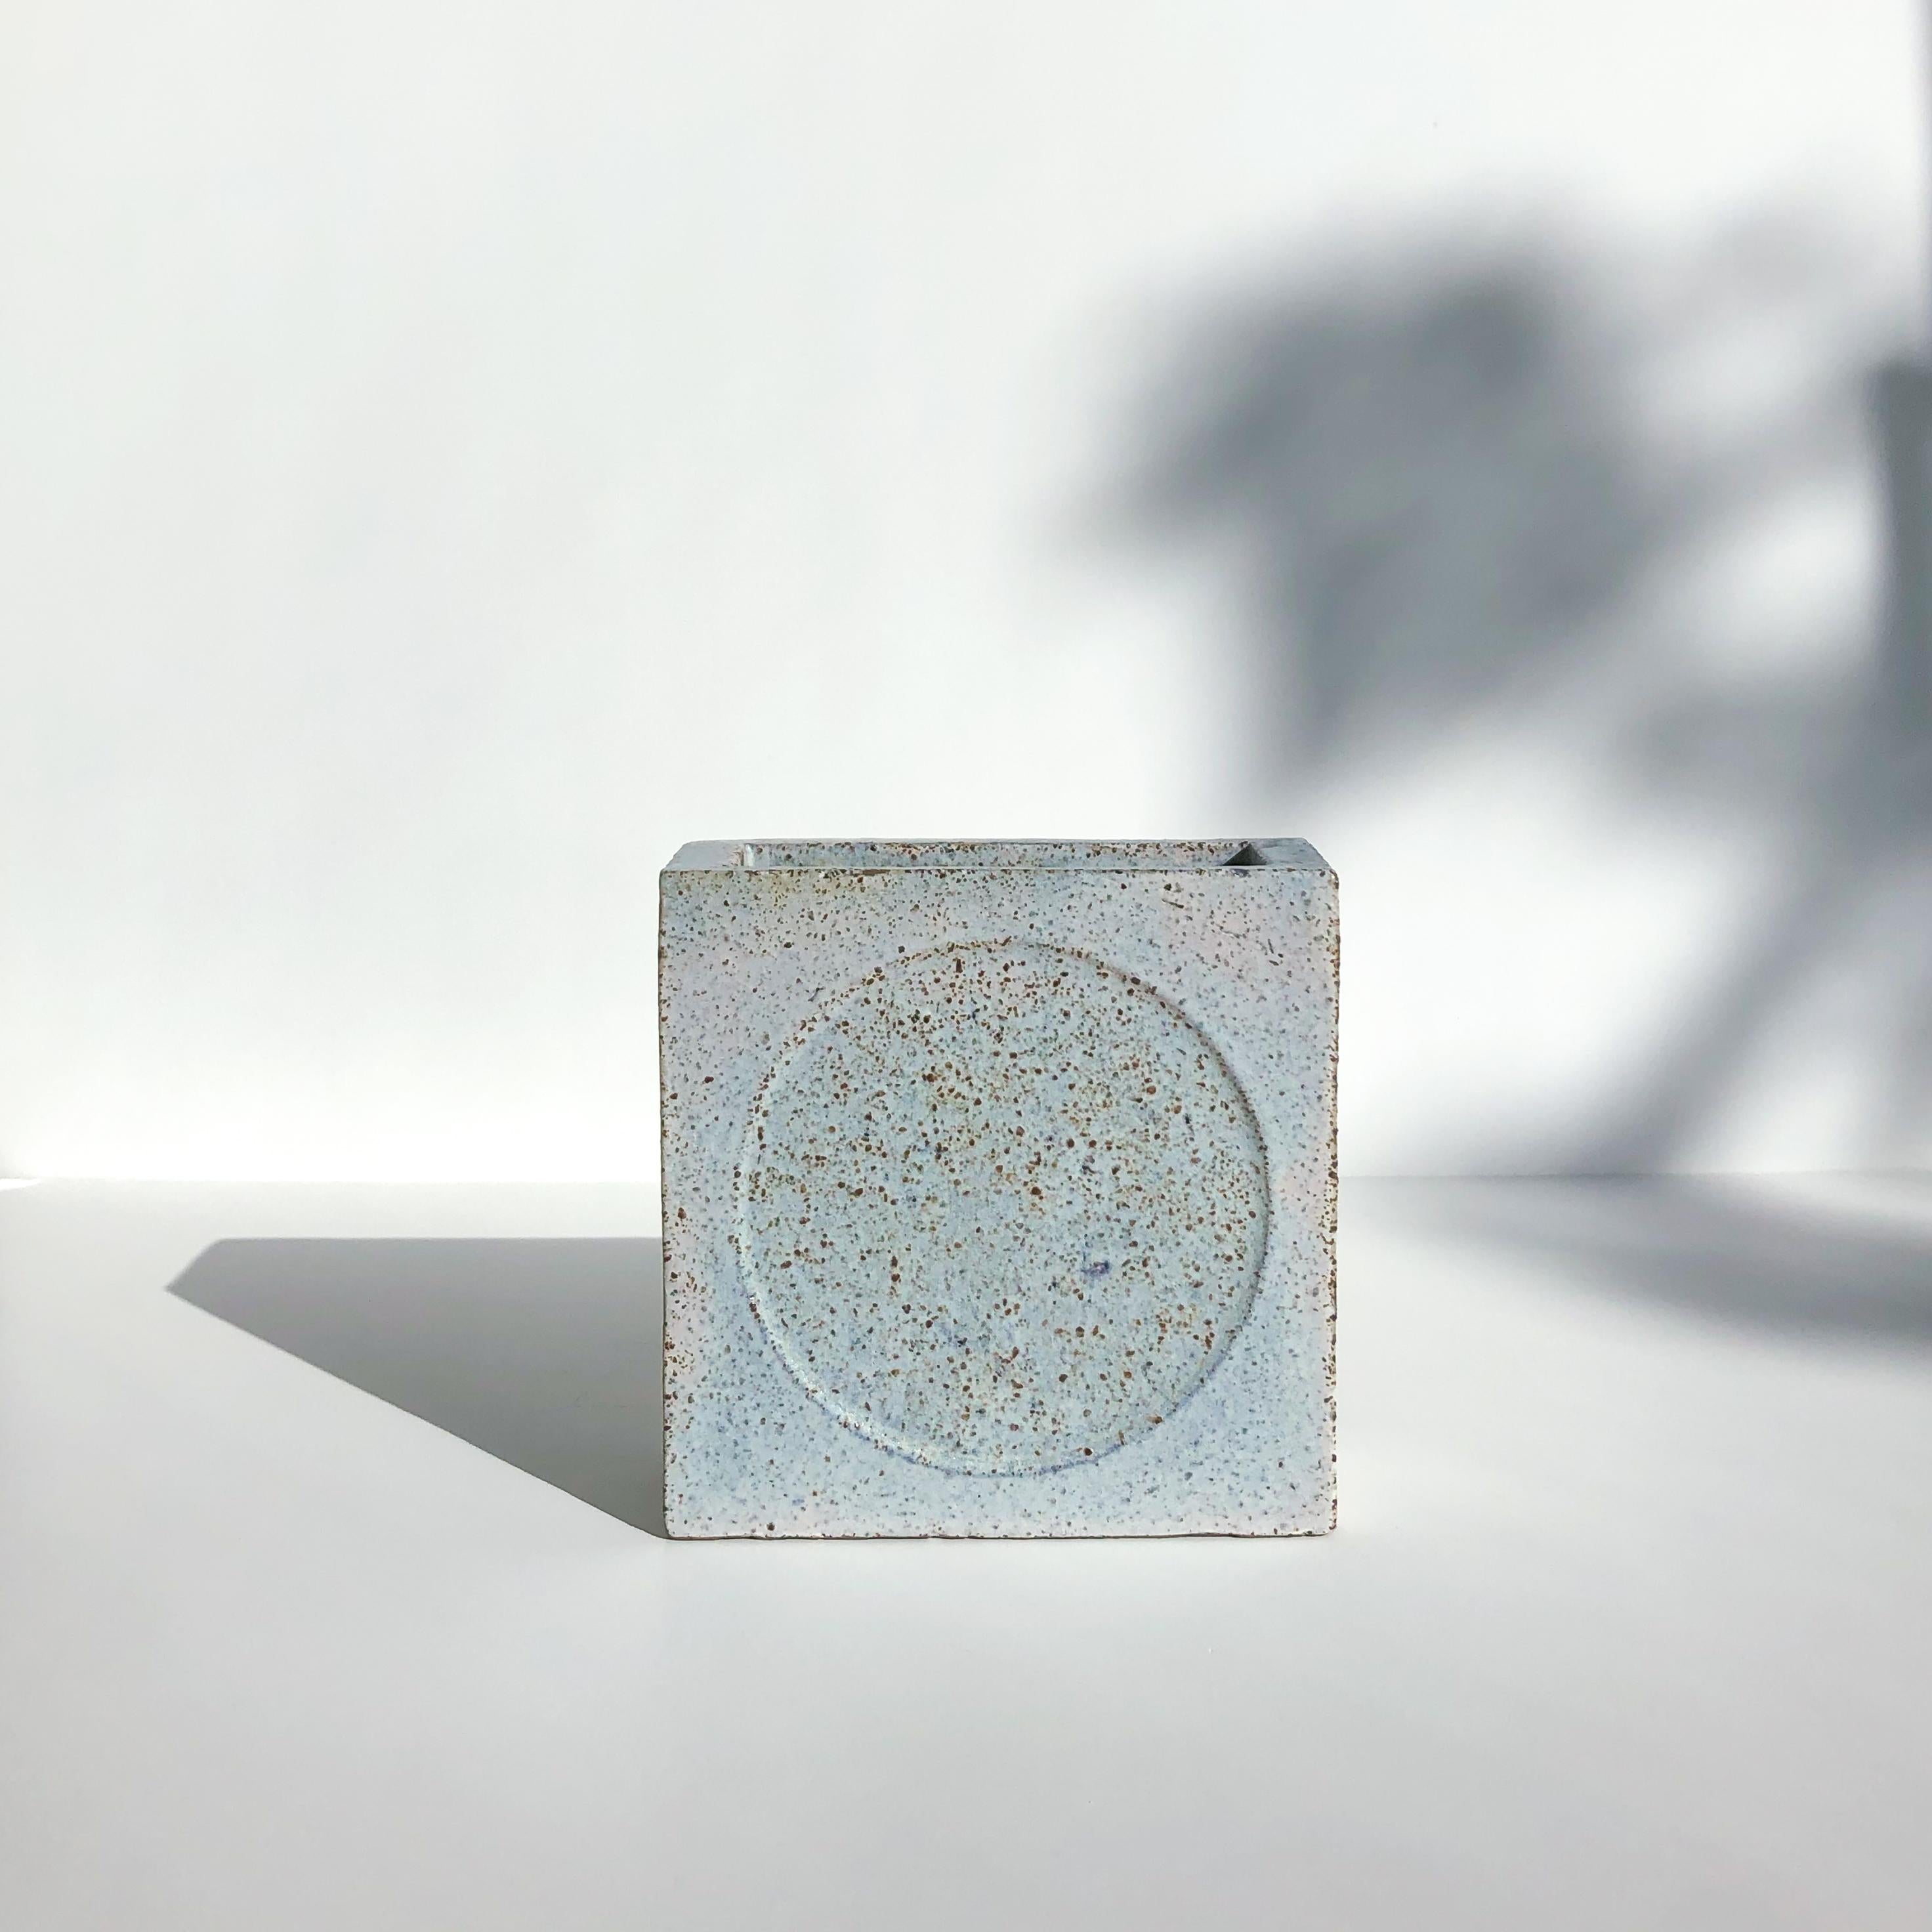 O vase III by Wendy Taylor
Dimensions: D10.5 x W9.5 x H25.5 cm
Materials: stoneware, glazed
Glaze colour/ surface pattern will vary.

Wendy Taylor's clay slab constructed works are influenced by elements of the built environment, particularly